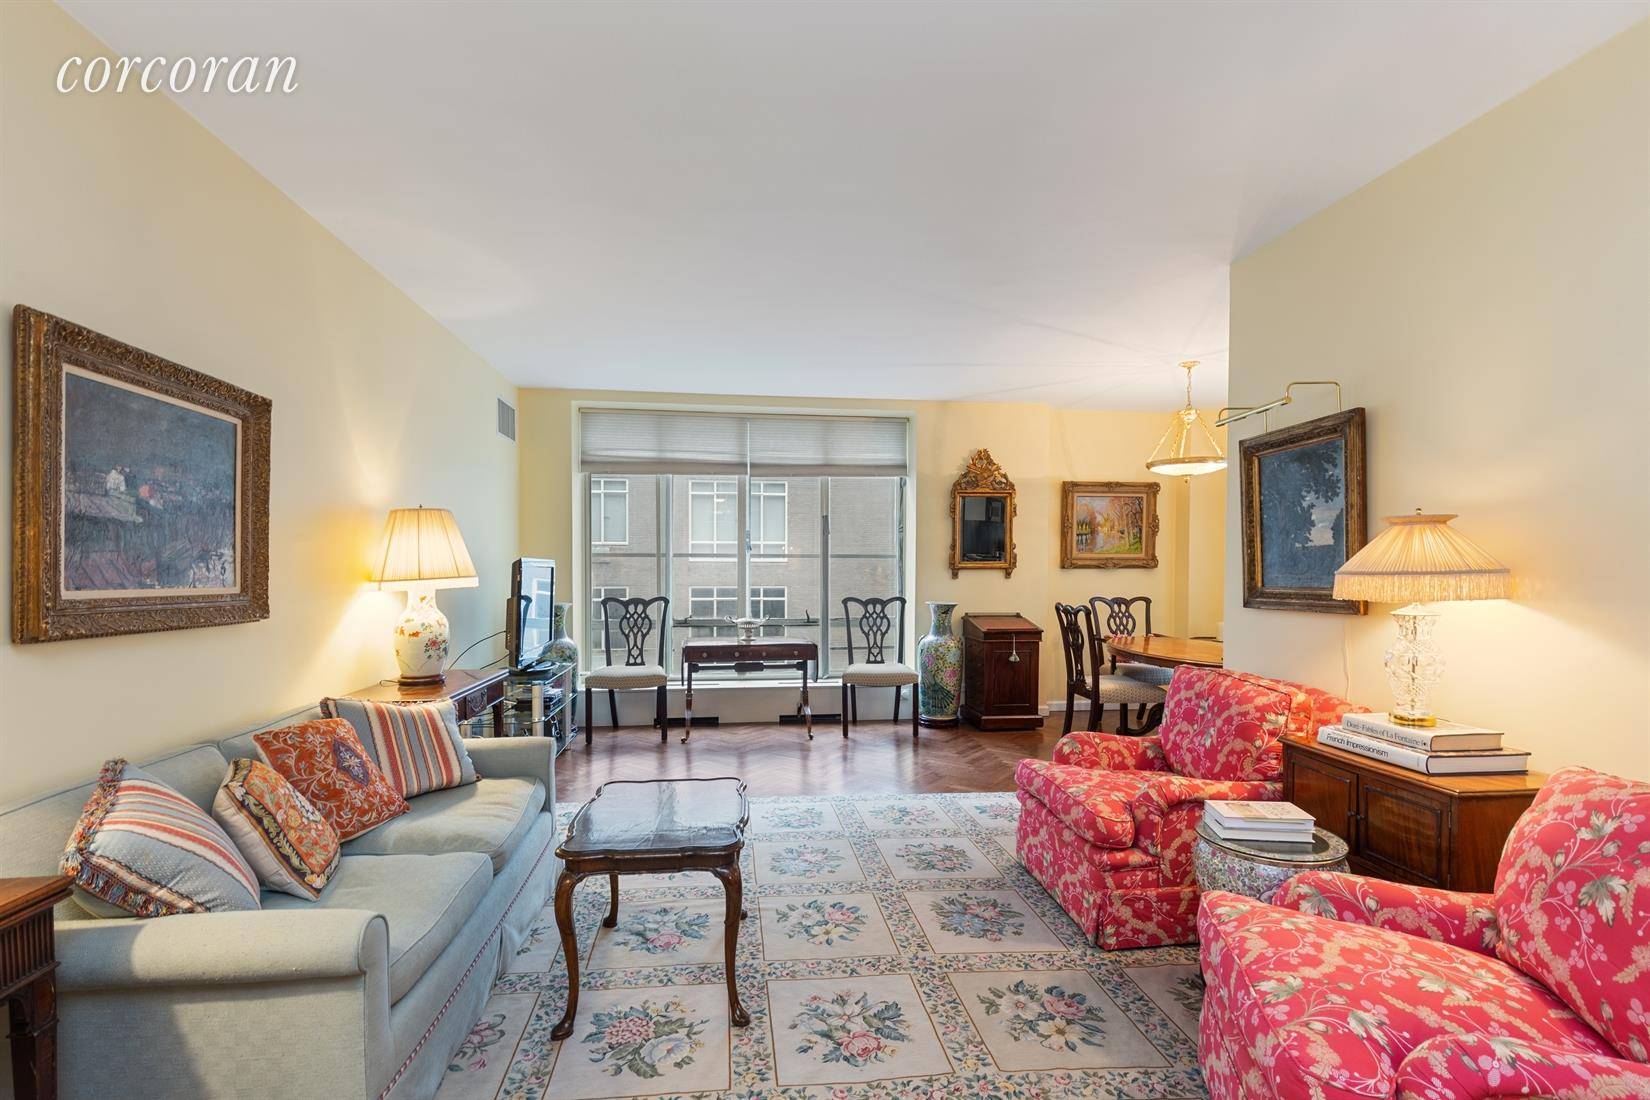 New to the market. This is a spacious one bedroom, one and a half bathroom apartment in one of the most sophisticated co operatives in Manhattan.